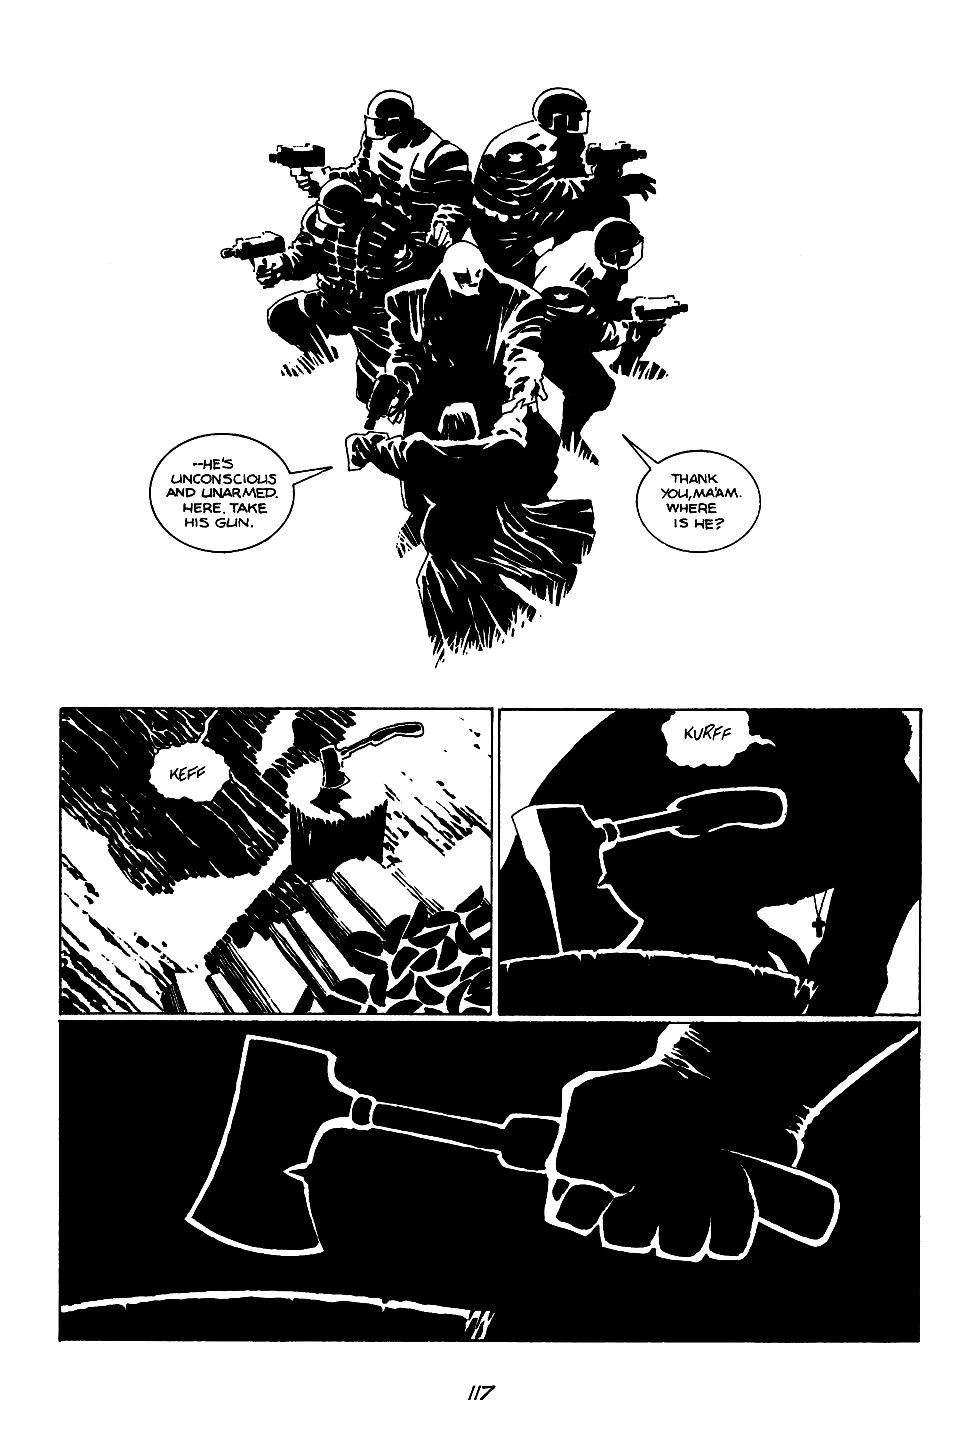 page 117 of sin city 1 the hard goodbye